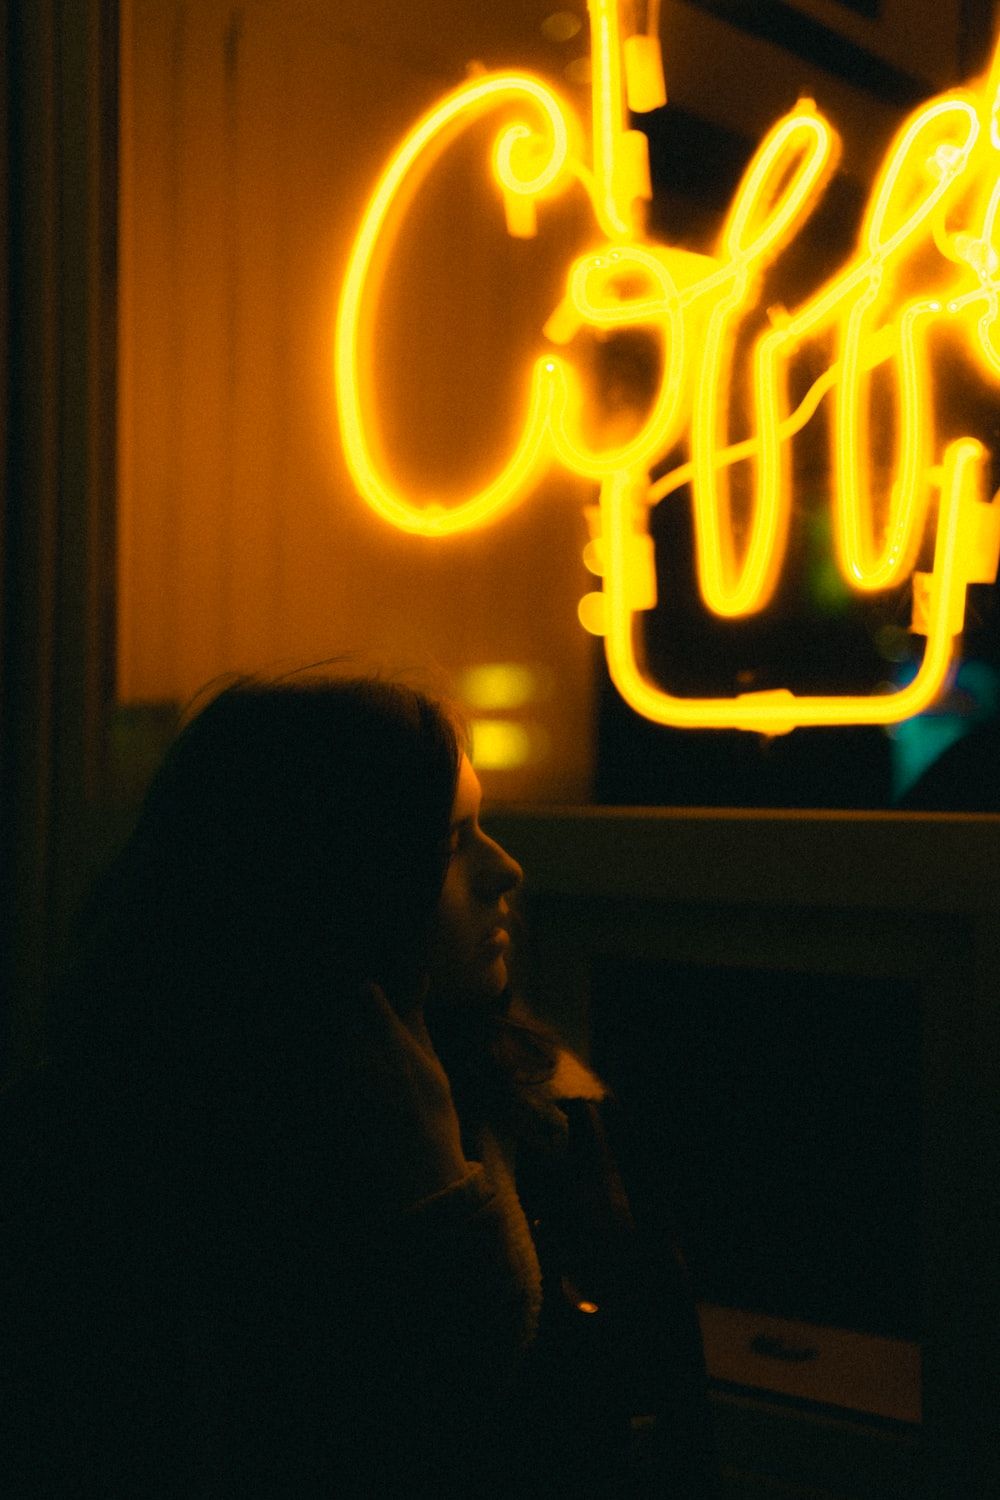 A woman sitting in front of an illuminated coffee sign - Light yellow